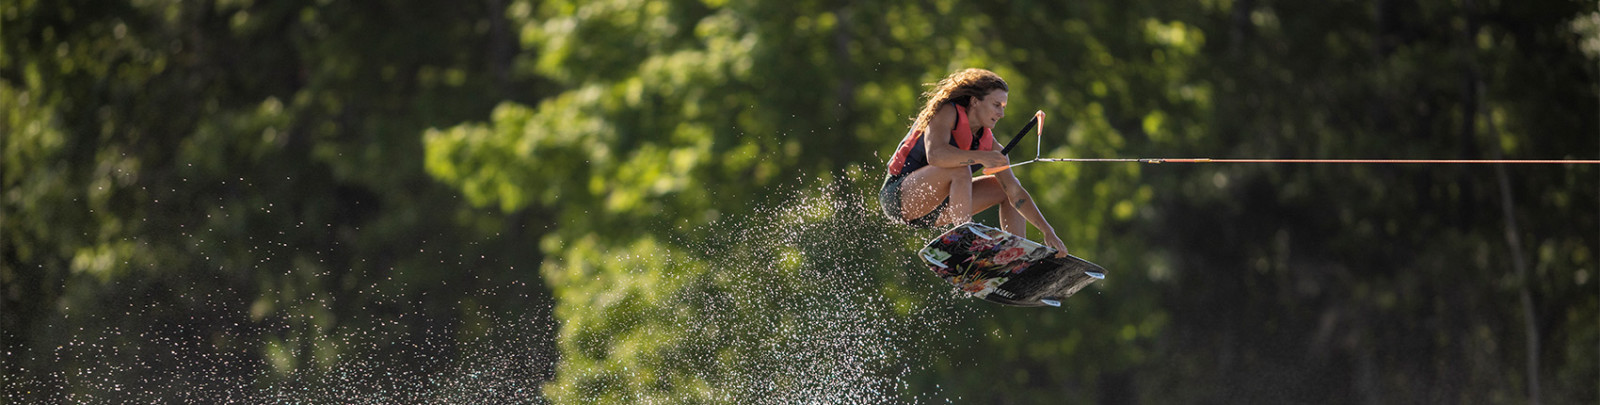 Ronix Packages | QUARTER 'TIL MIDNIGHT WITH RISE | Ronix Wakeboards